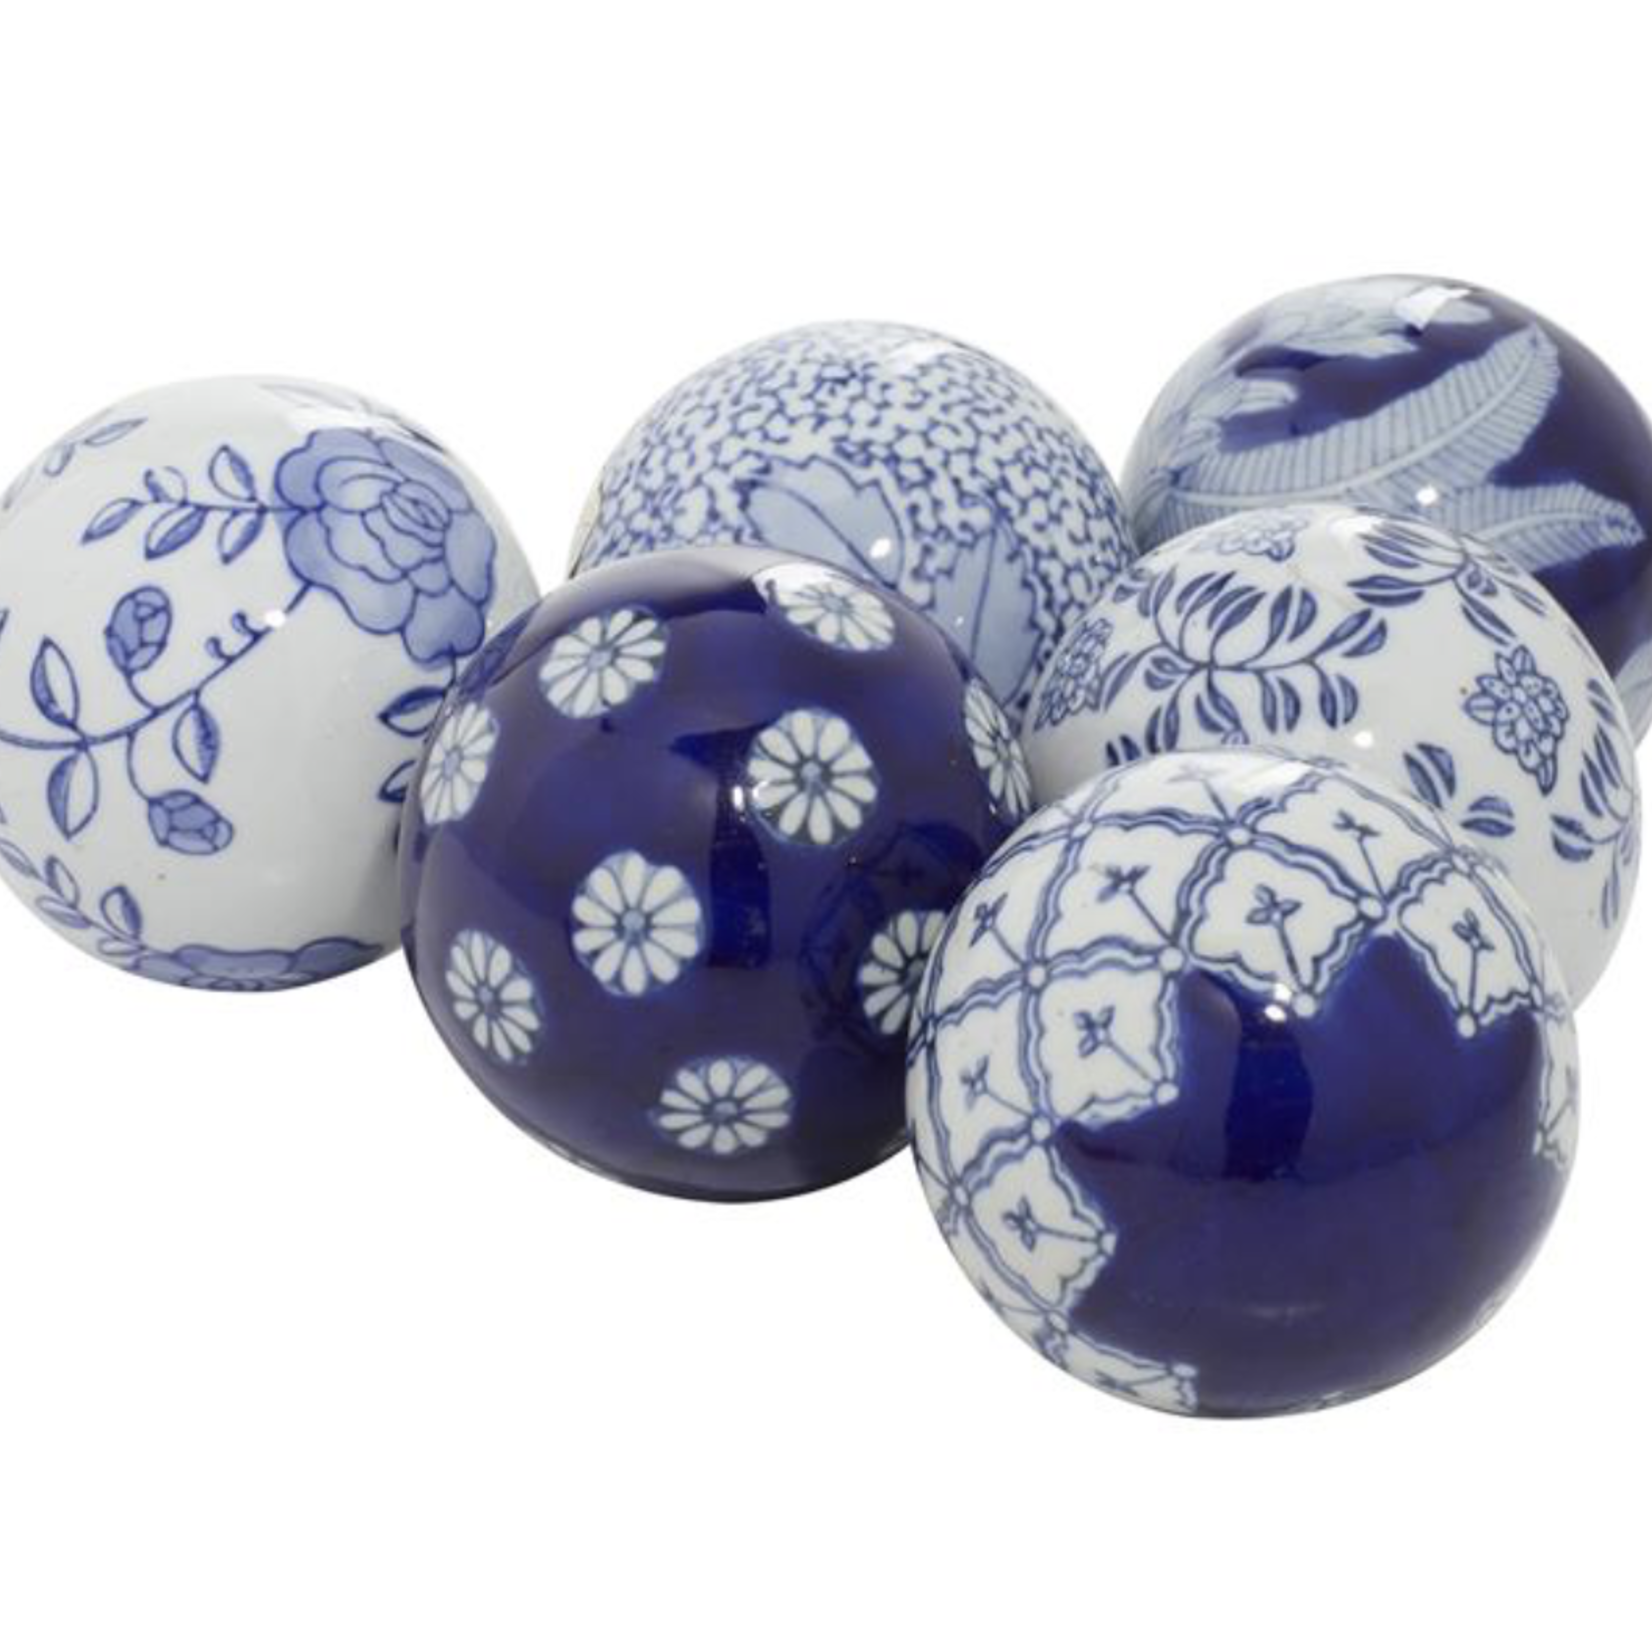 3.15”d BLUE CERAMIC FLORAL HANDMADE GLOSSY DECORATIVE BALL ORBS & VASE FILLER WITH VARYING PATTERNS (price per each, box has assortment)